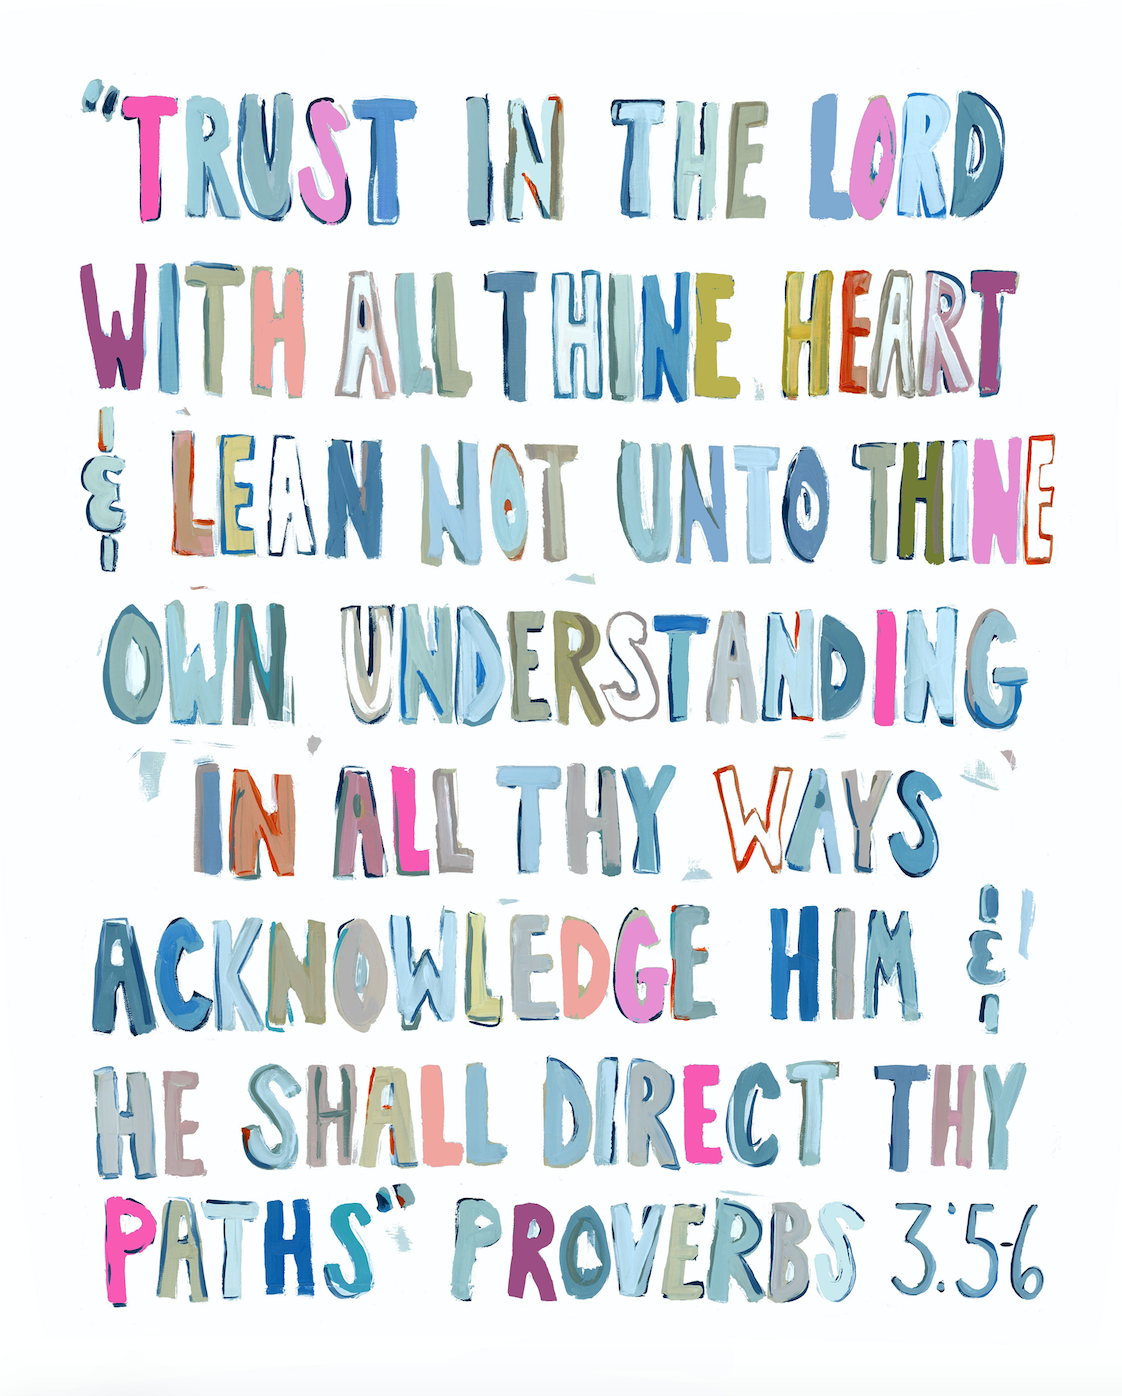 Proverbs 3: 5-6 PINKS on paper